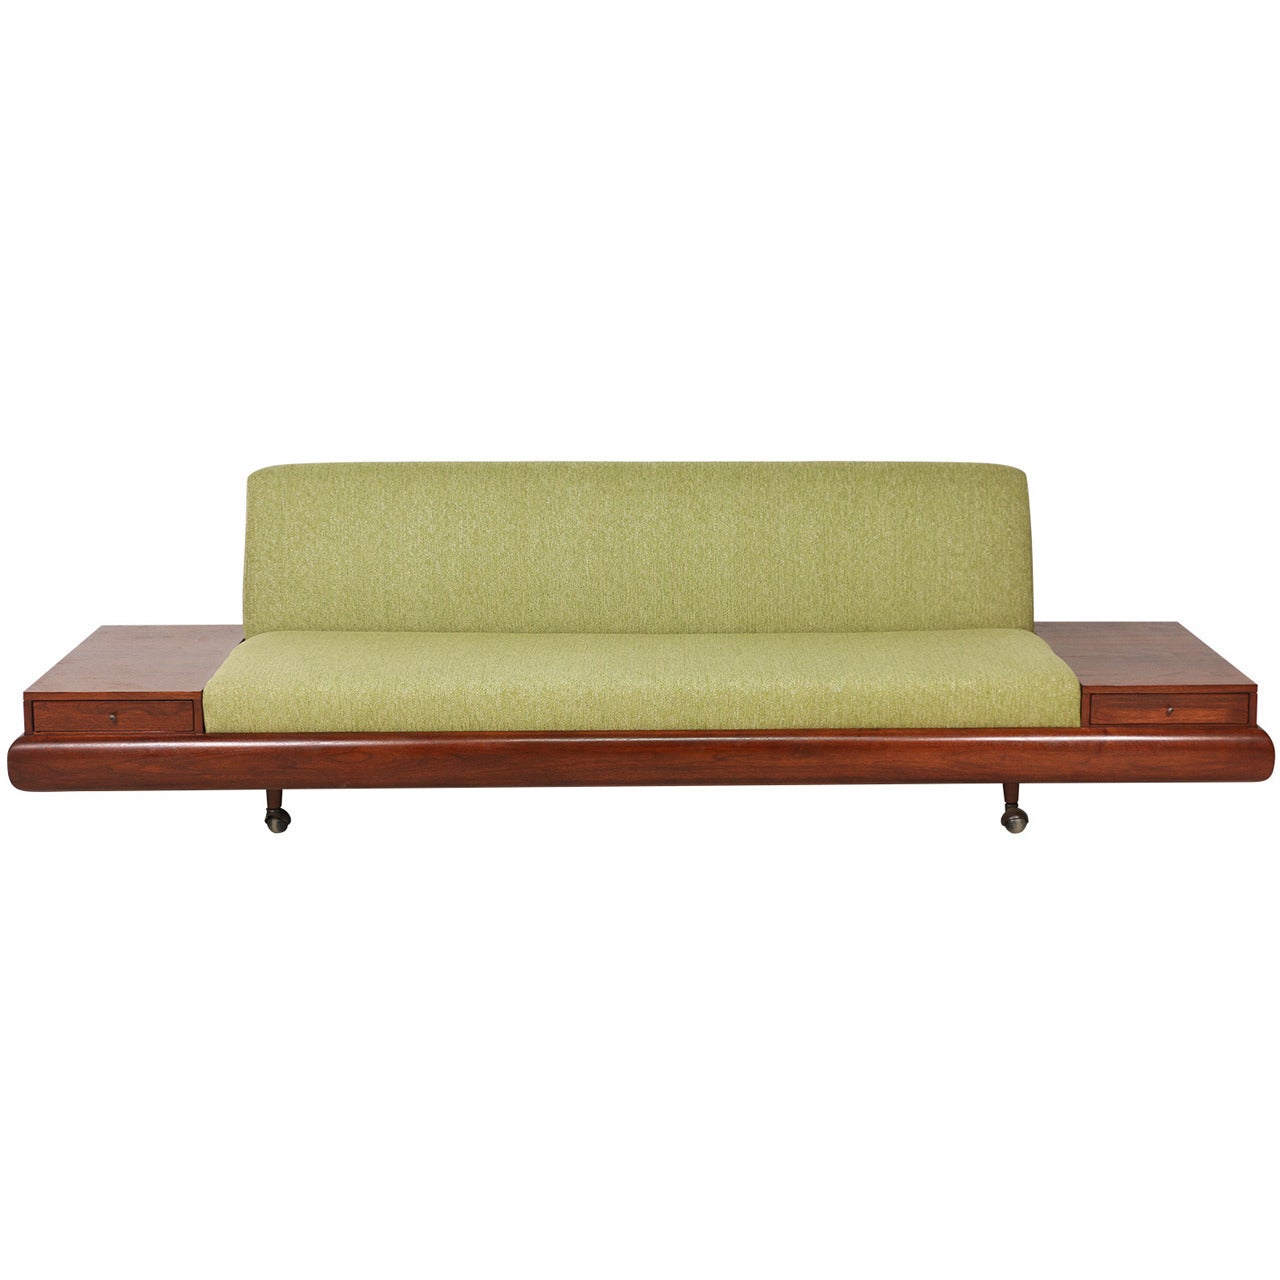 Adrian Pearsall Platform Sofa with Side Tables for Craft Associates